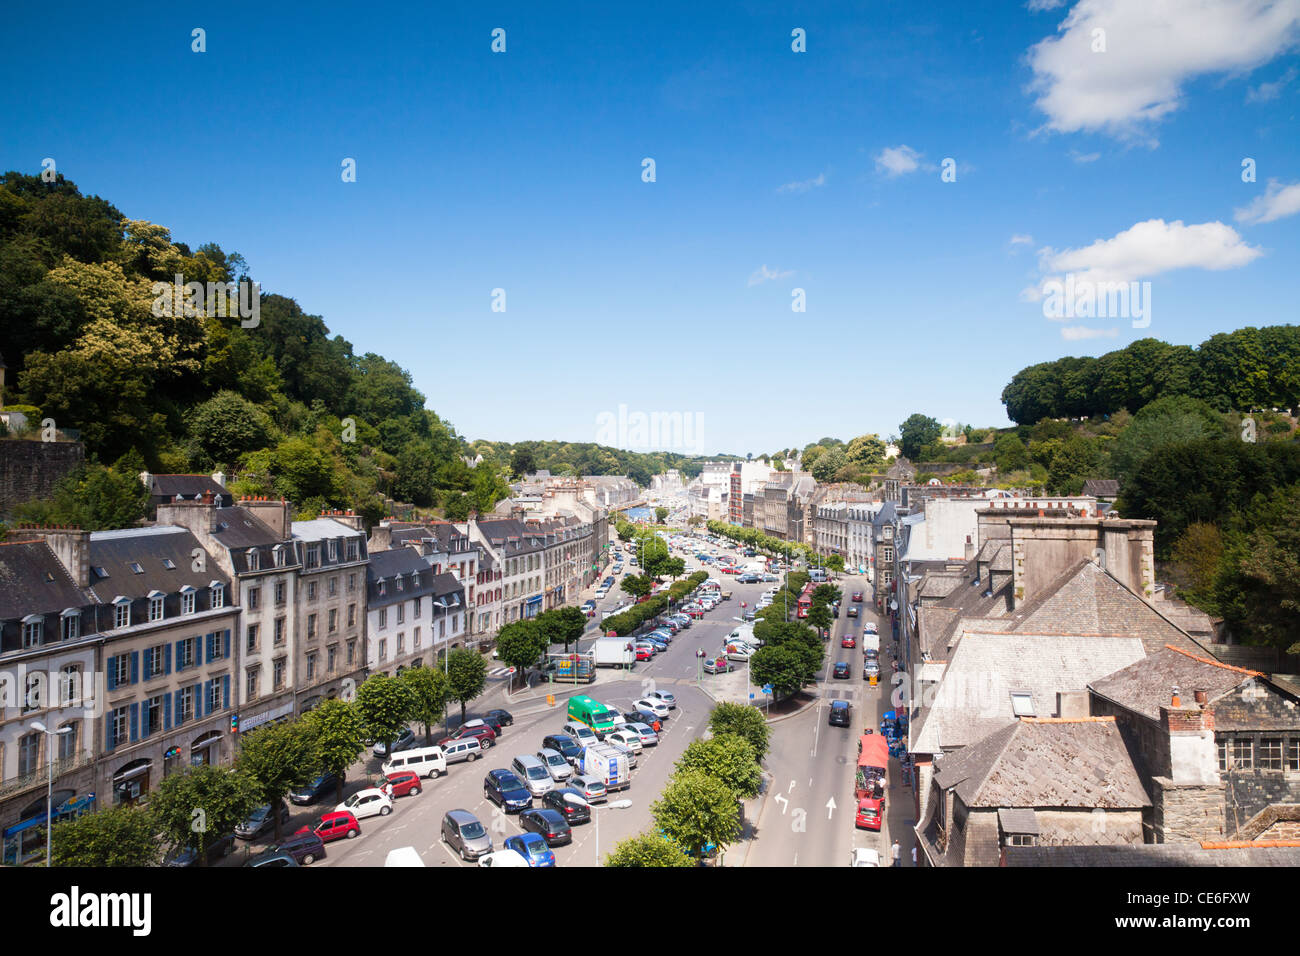 The main street of Morlaix, Brittany, France, from the viaduct on a bright summer day. Stock Photo